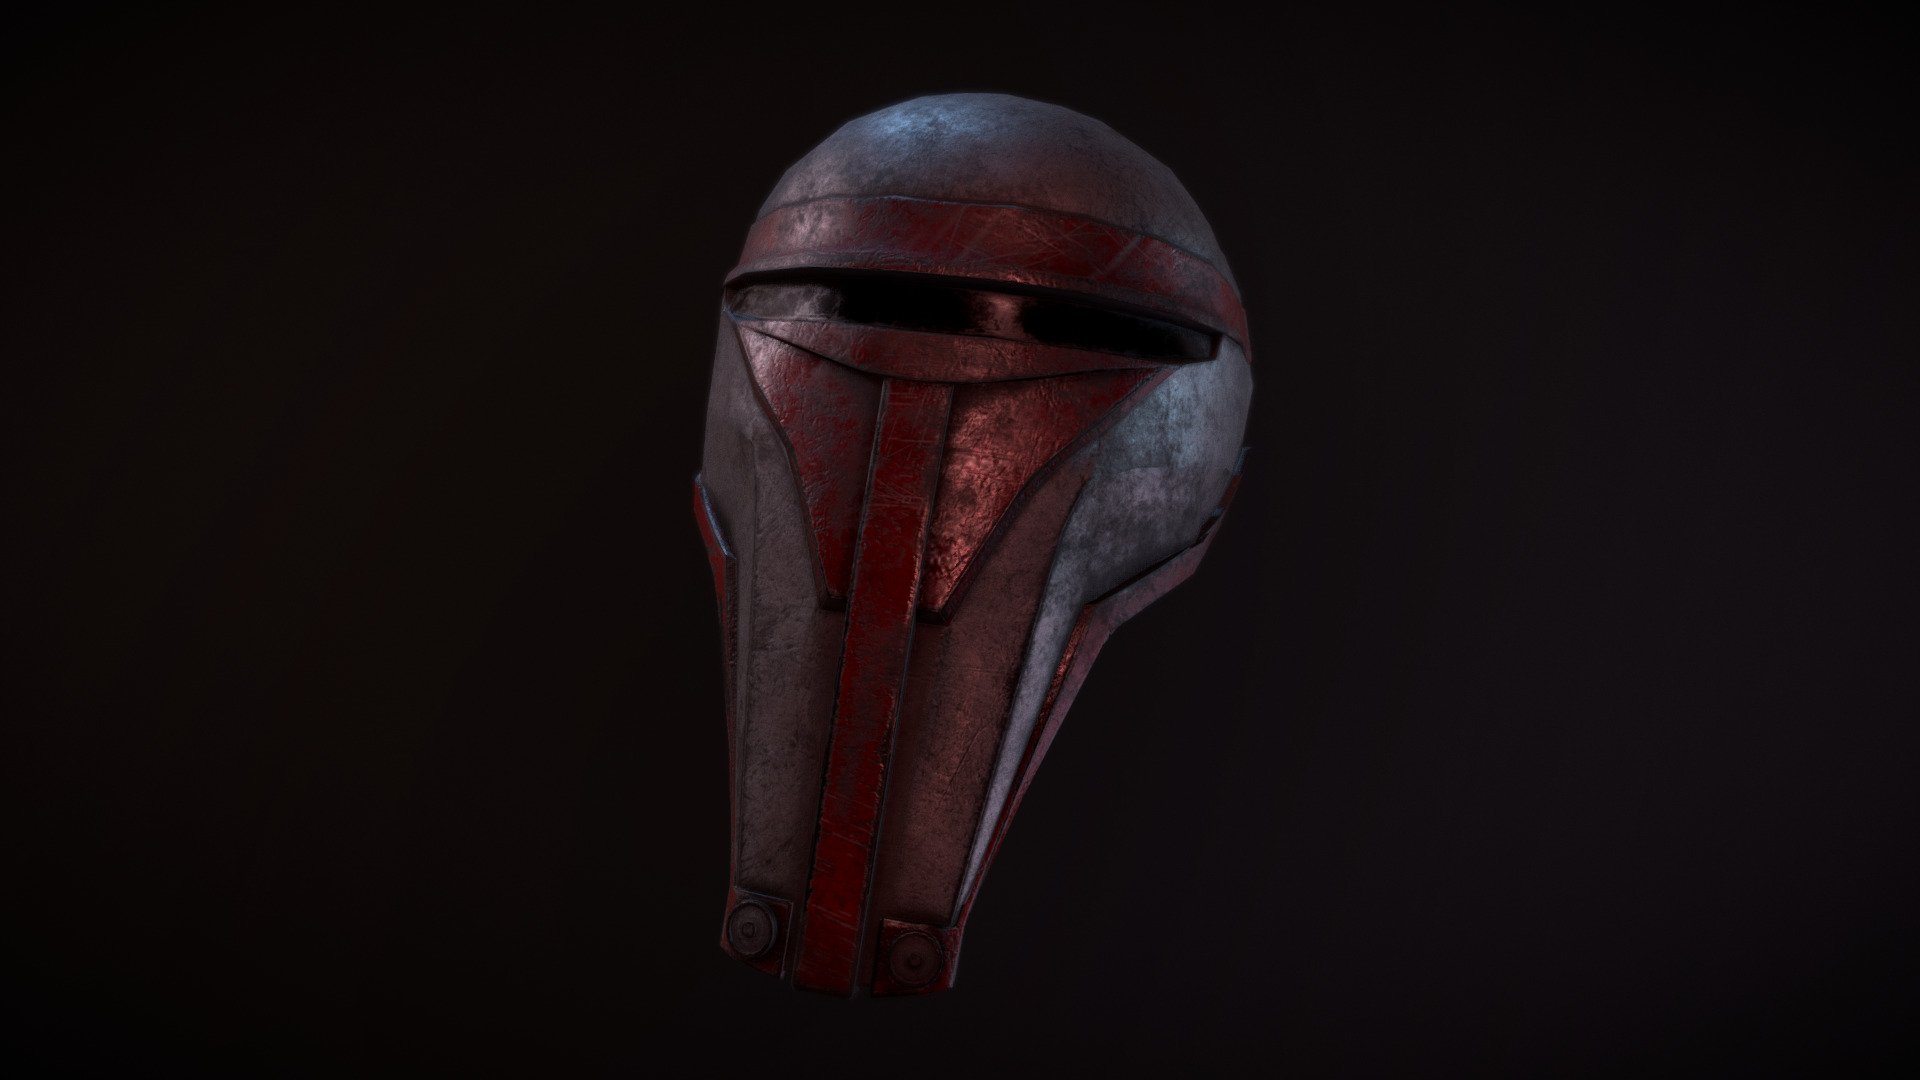 The mask worn by Darth Revan from Star Wars the Old Republic - Darth Revan's mask - 3D model by dbugg1138 3d model